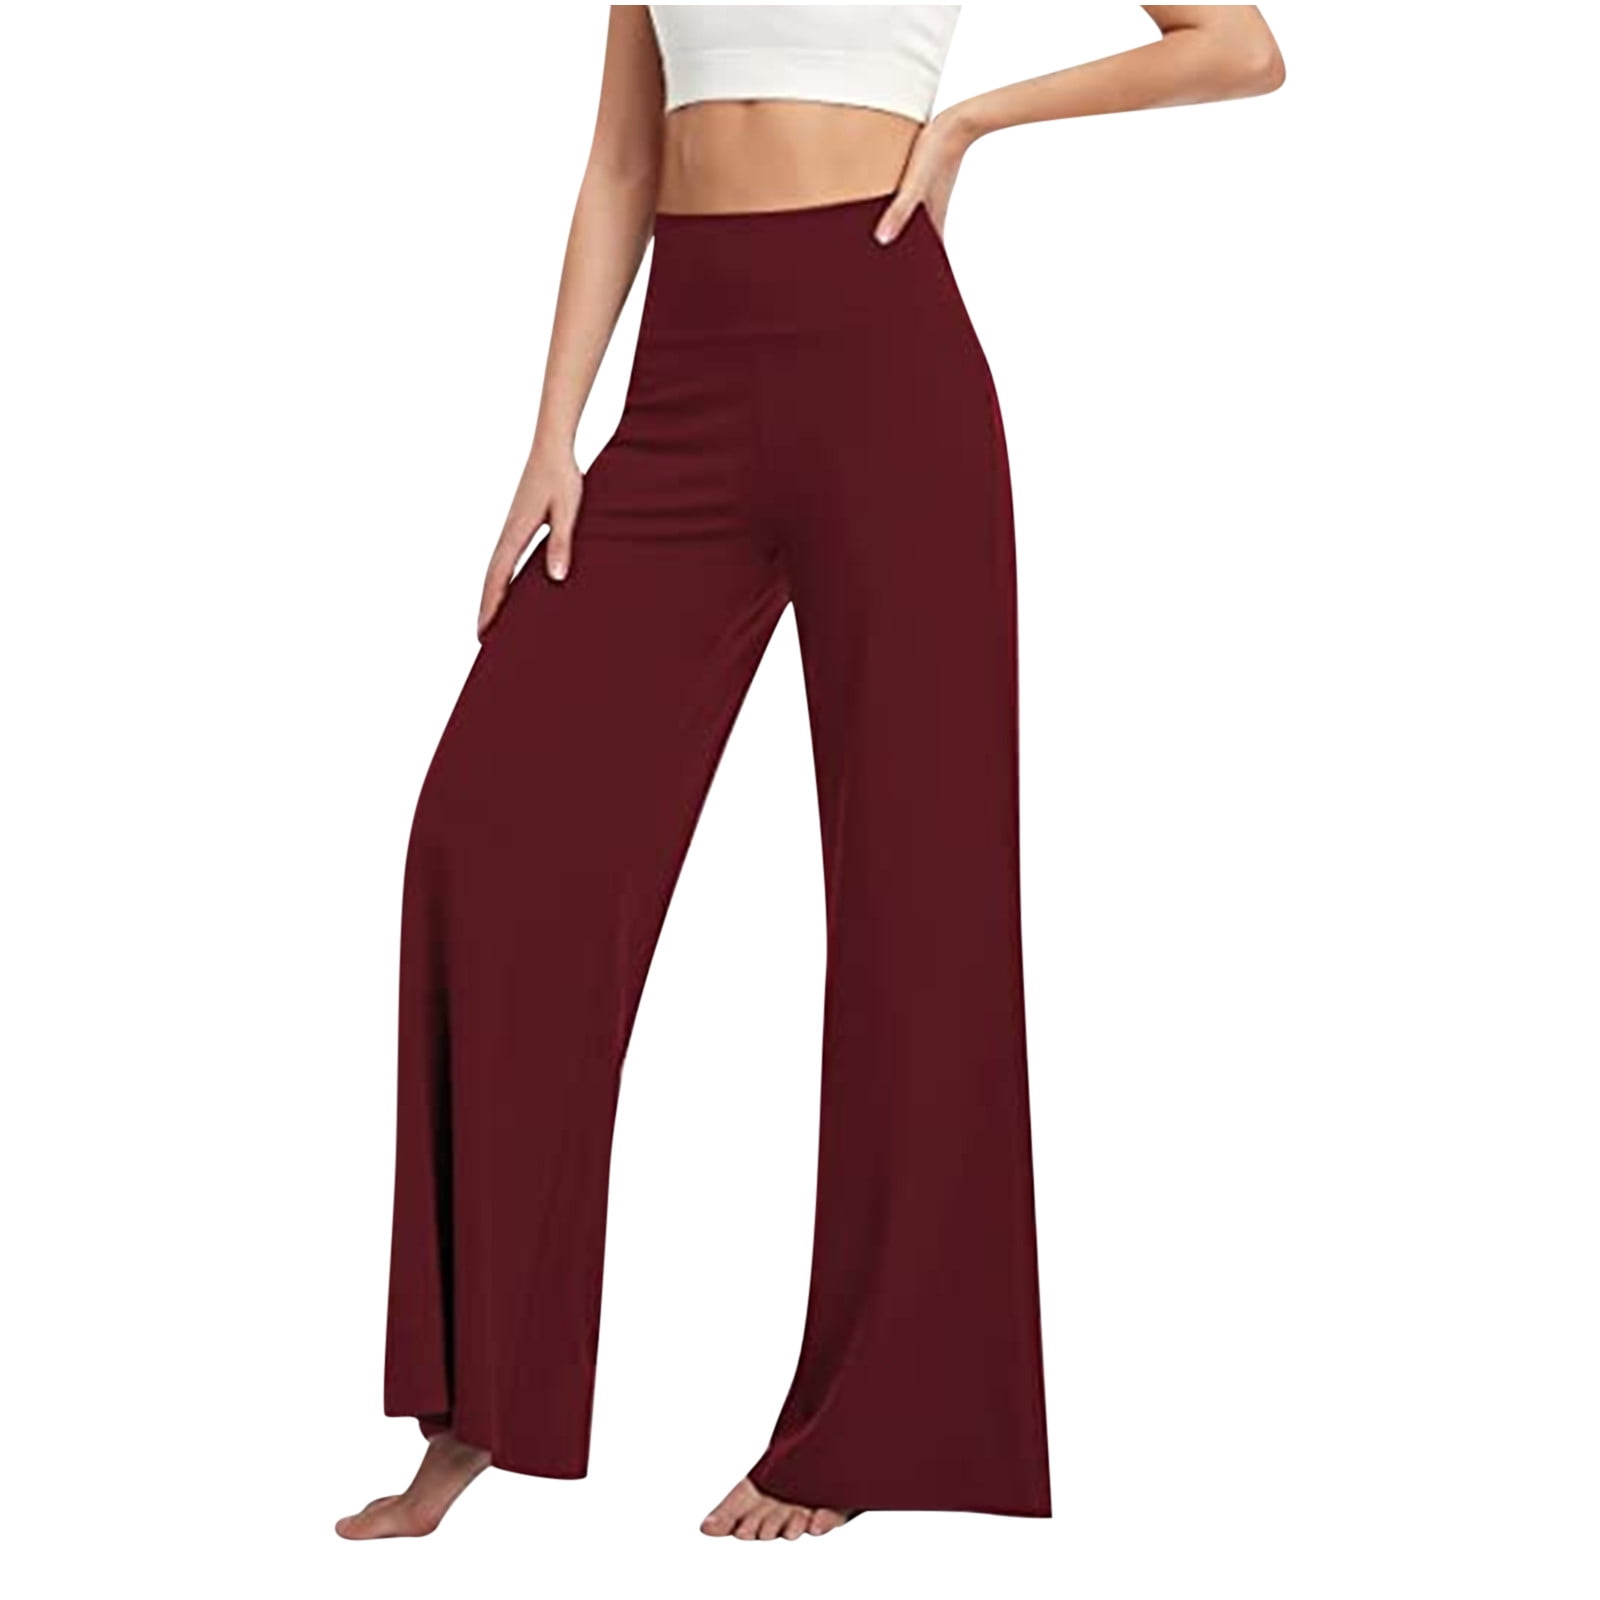 Falags Womens High Waisted Workout Yoga Pants Tummy Control Running Palazzo Lounge Comfy Stretch Wide Leg Harem